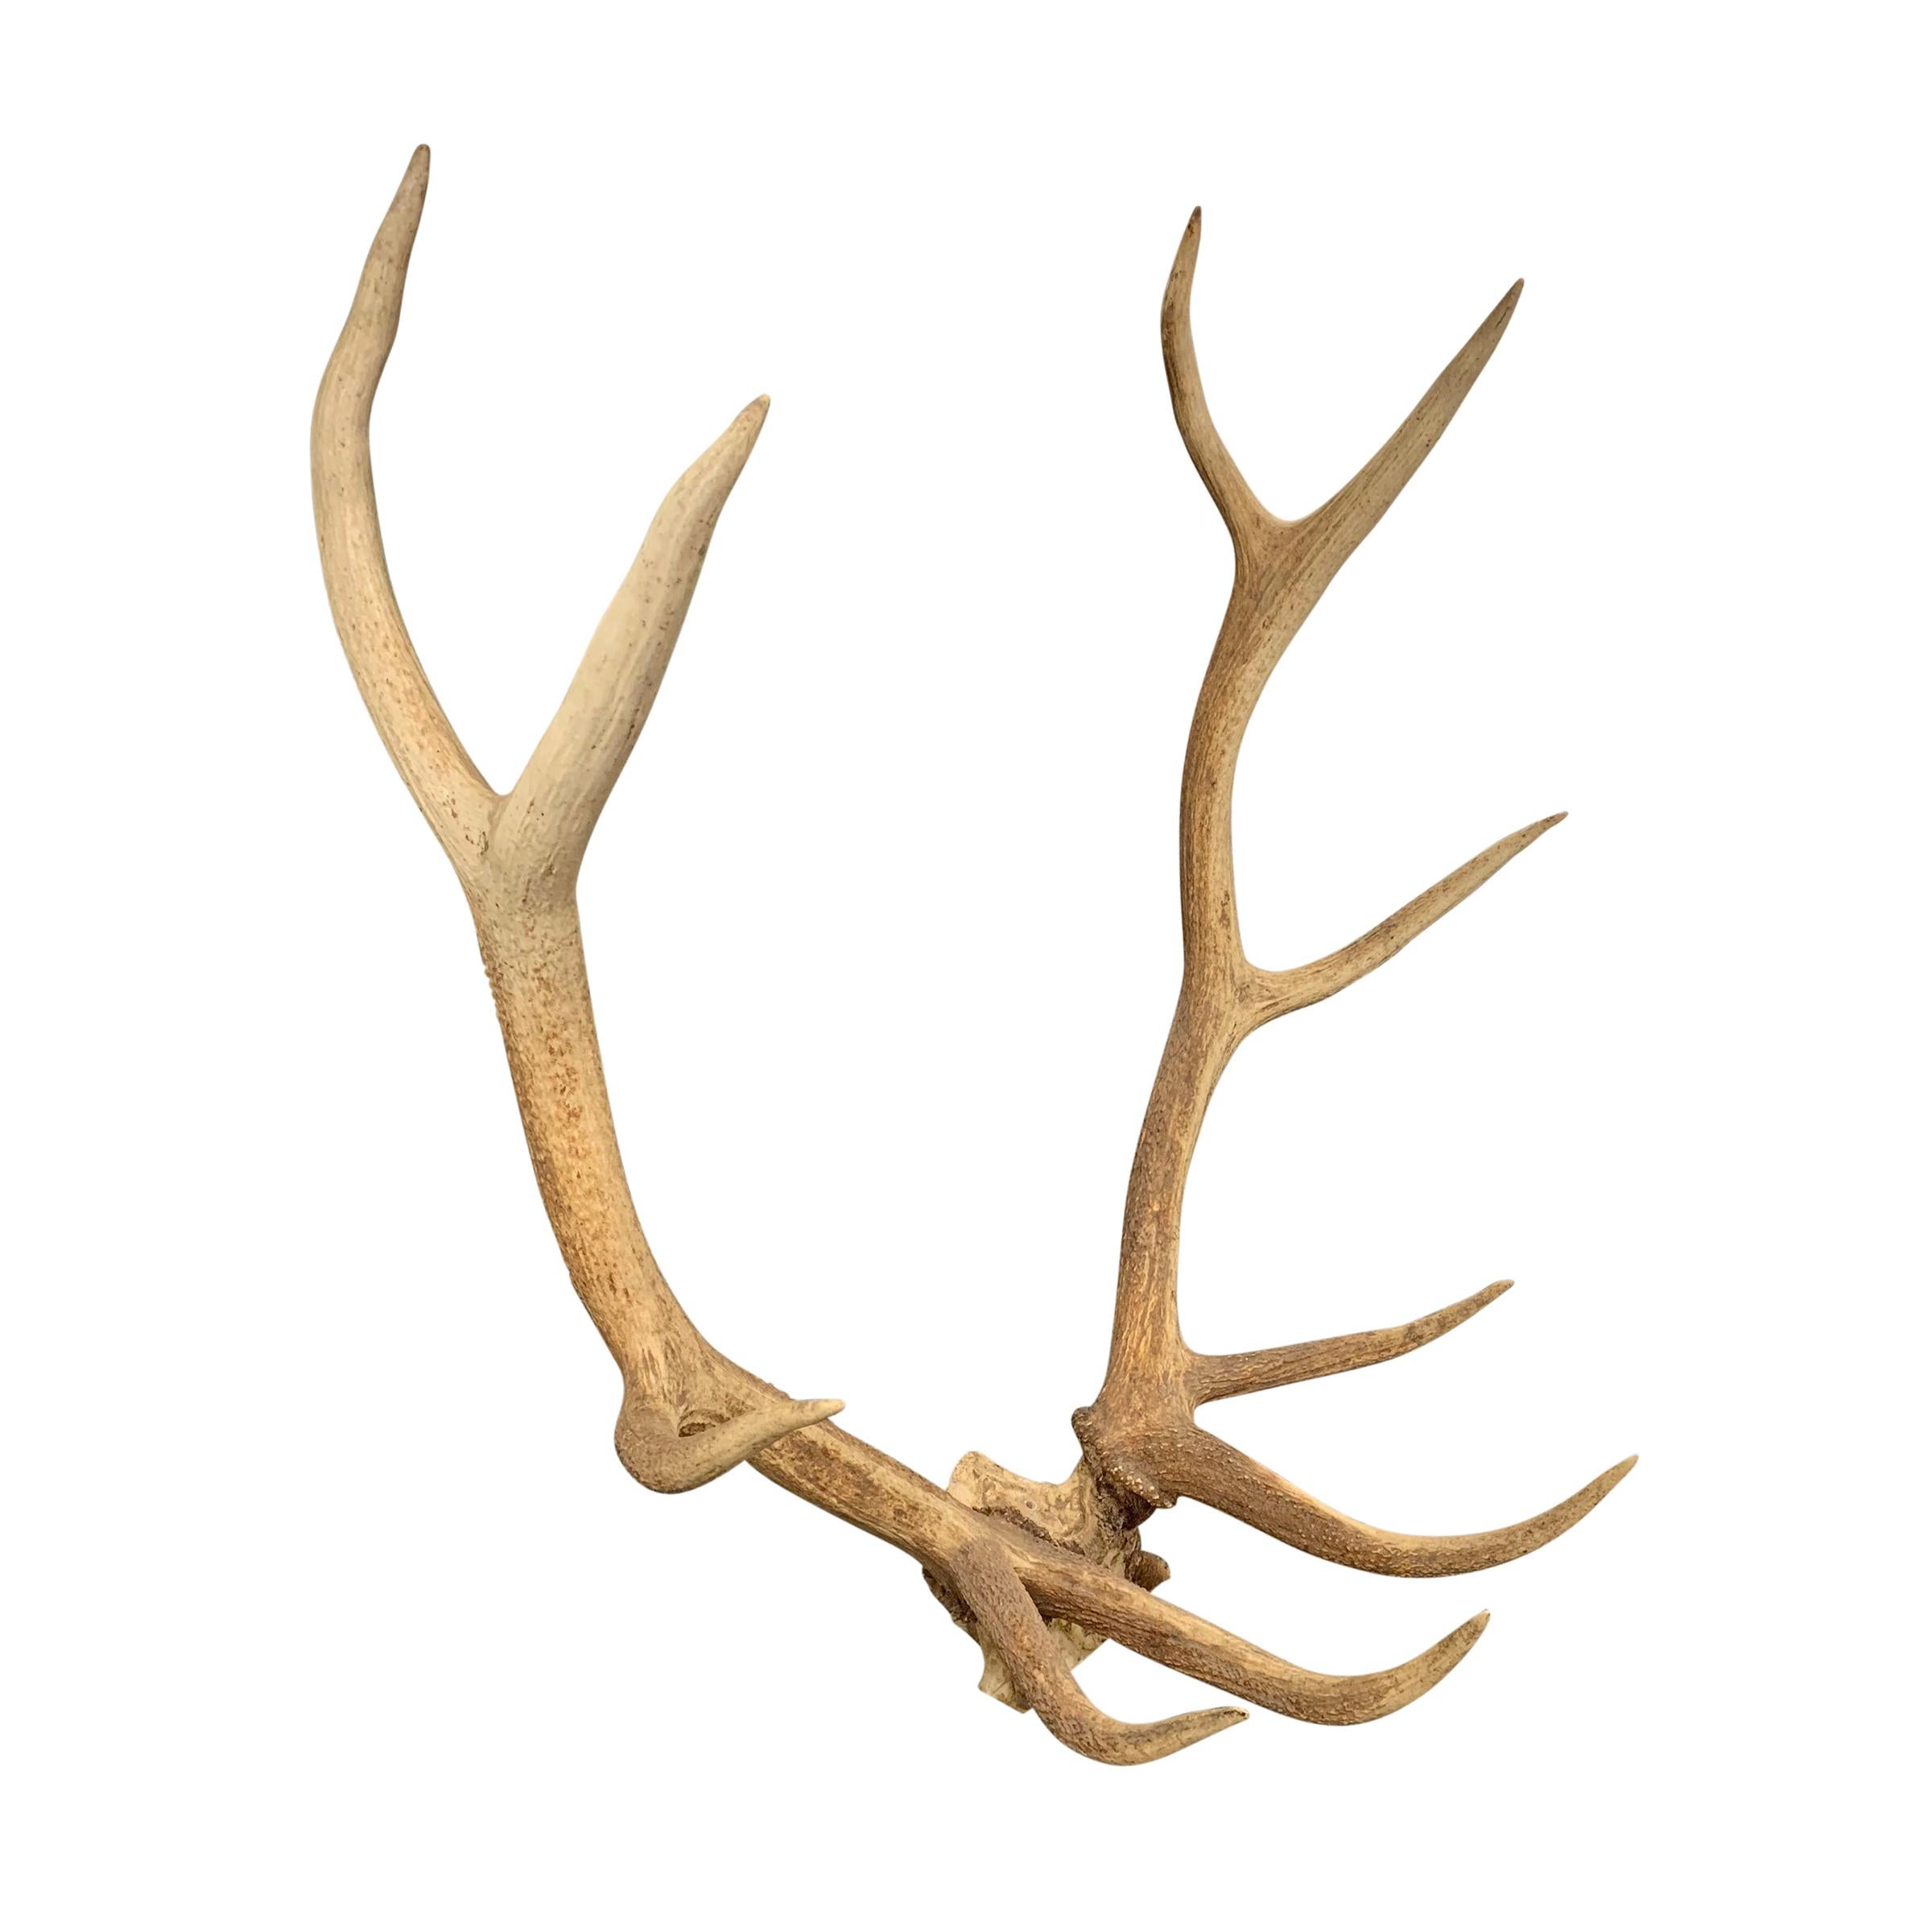 A fantastic set of massive Elk antlers with the skull cap in tact, ready for a wooden mount or use as is.